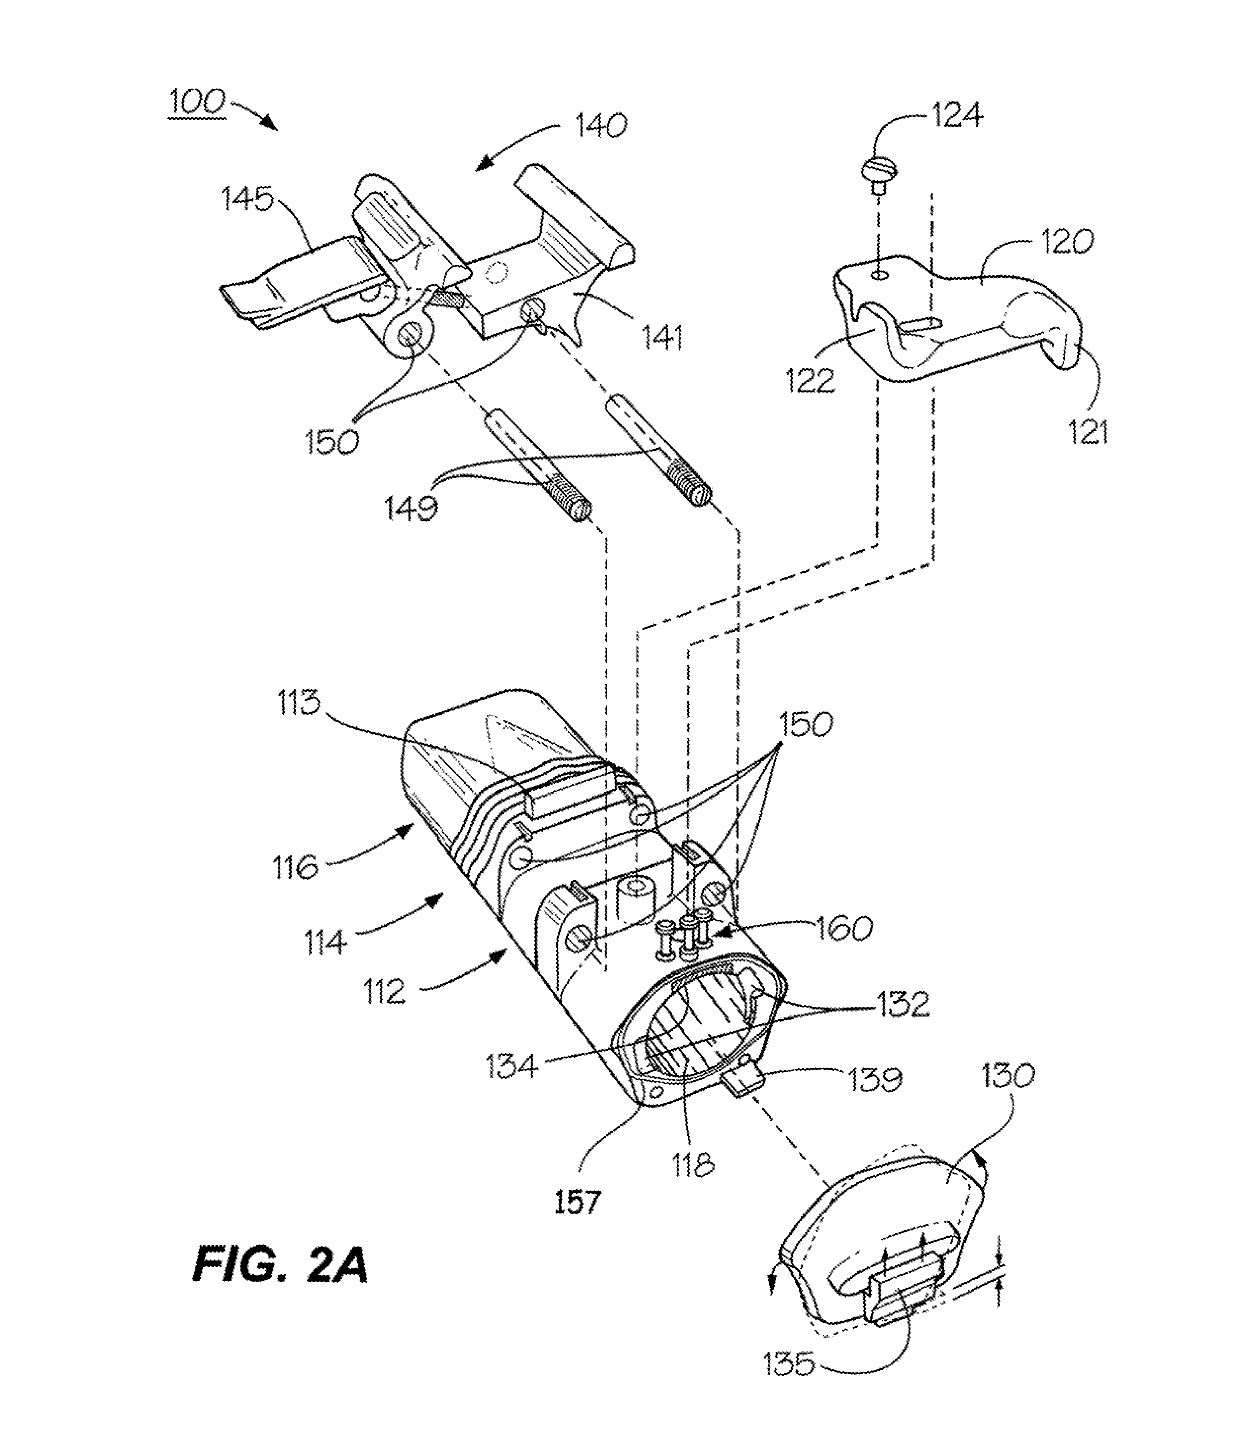 Retention holster for a firearm having an offset mounted accessory